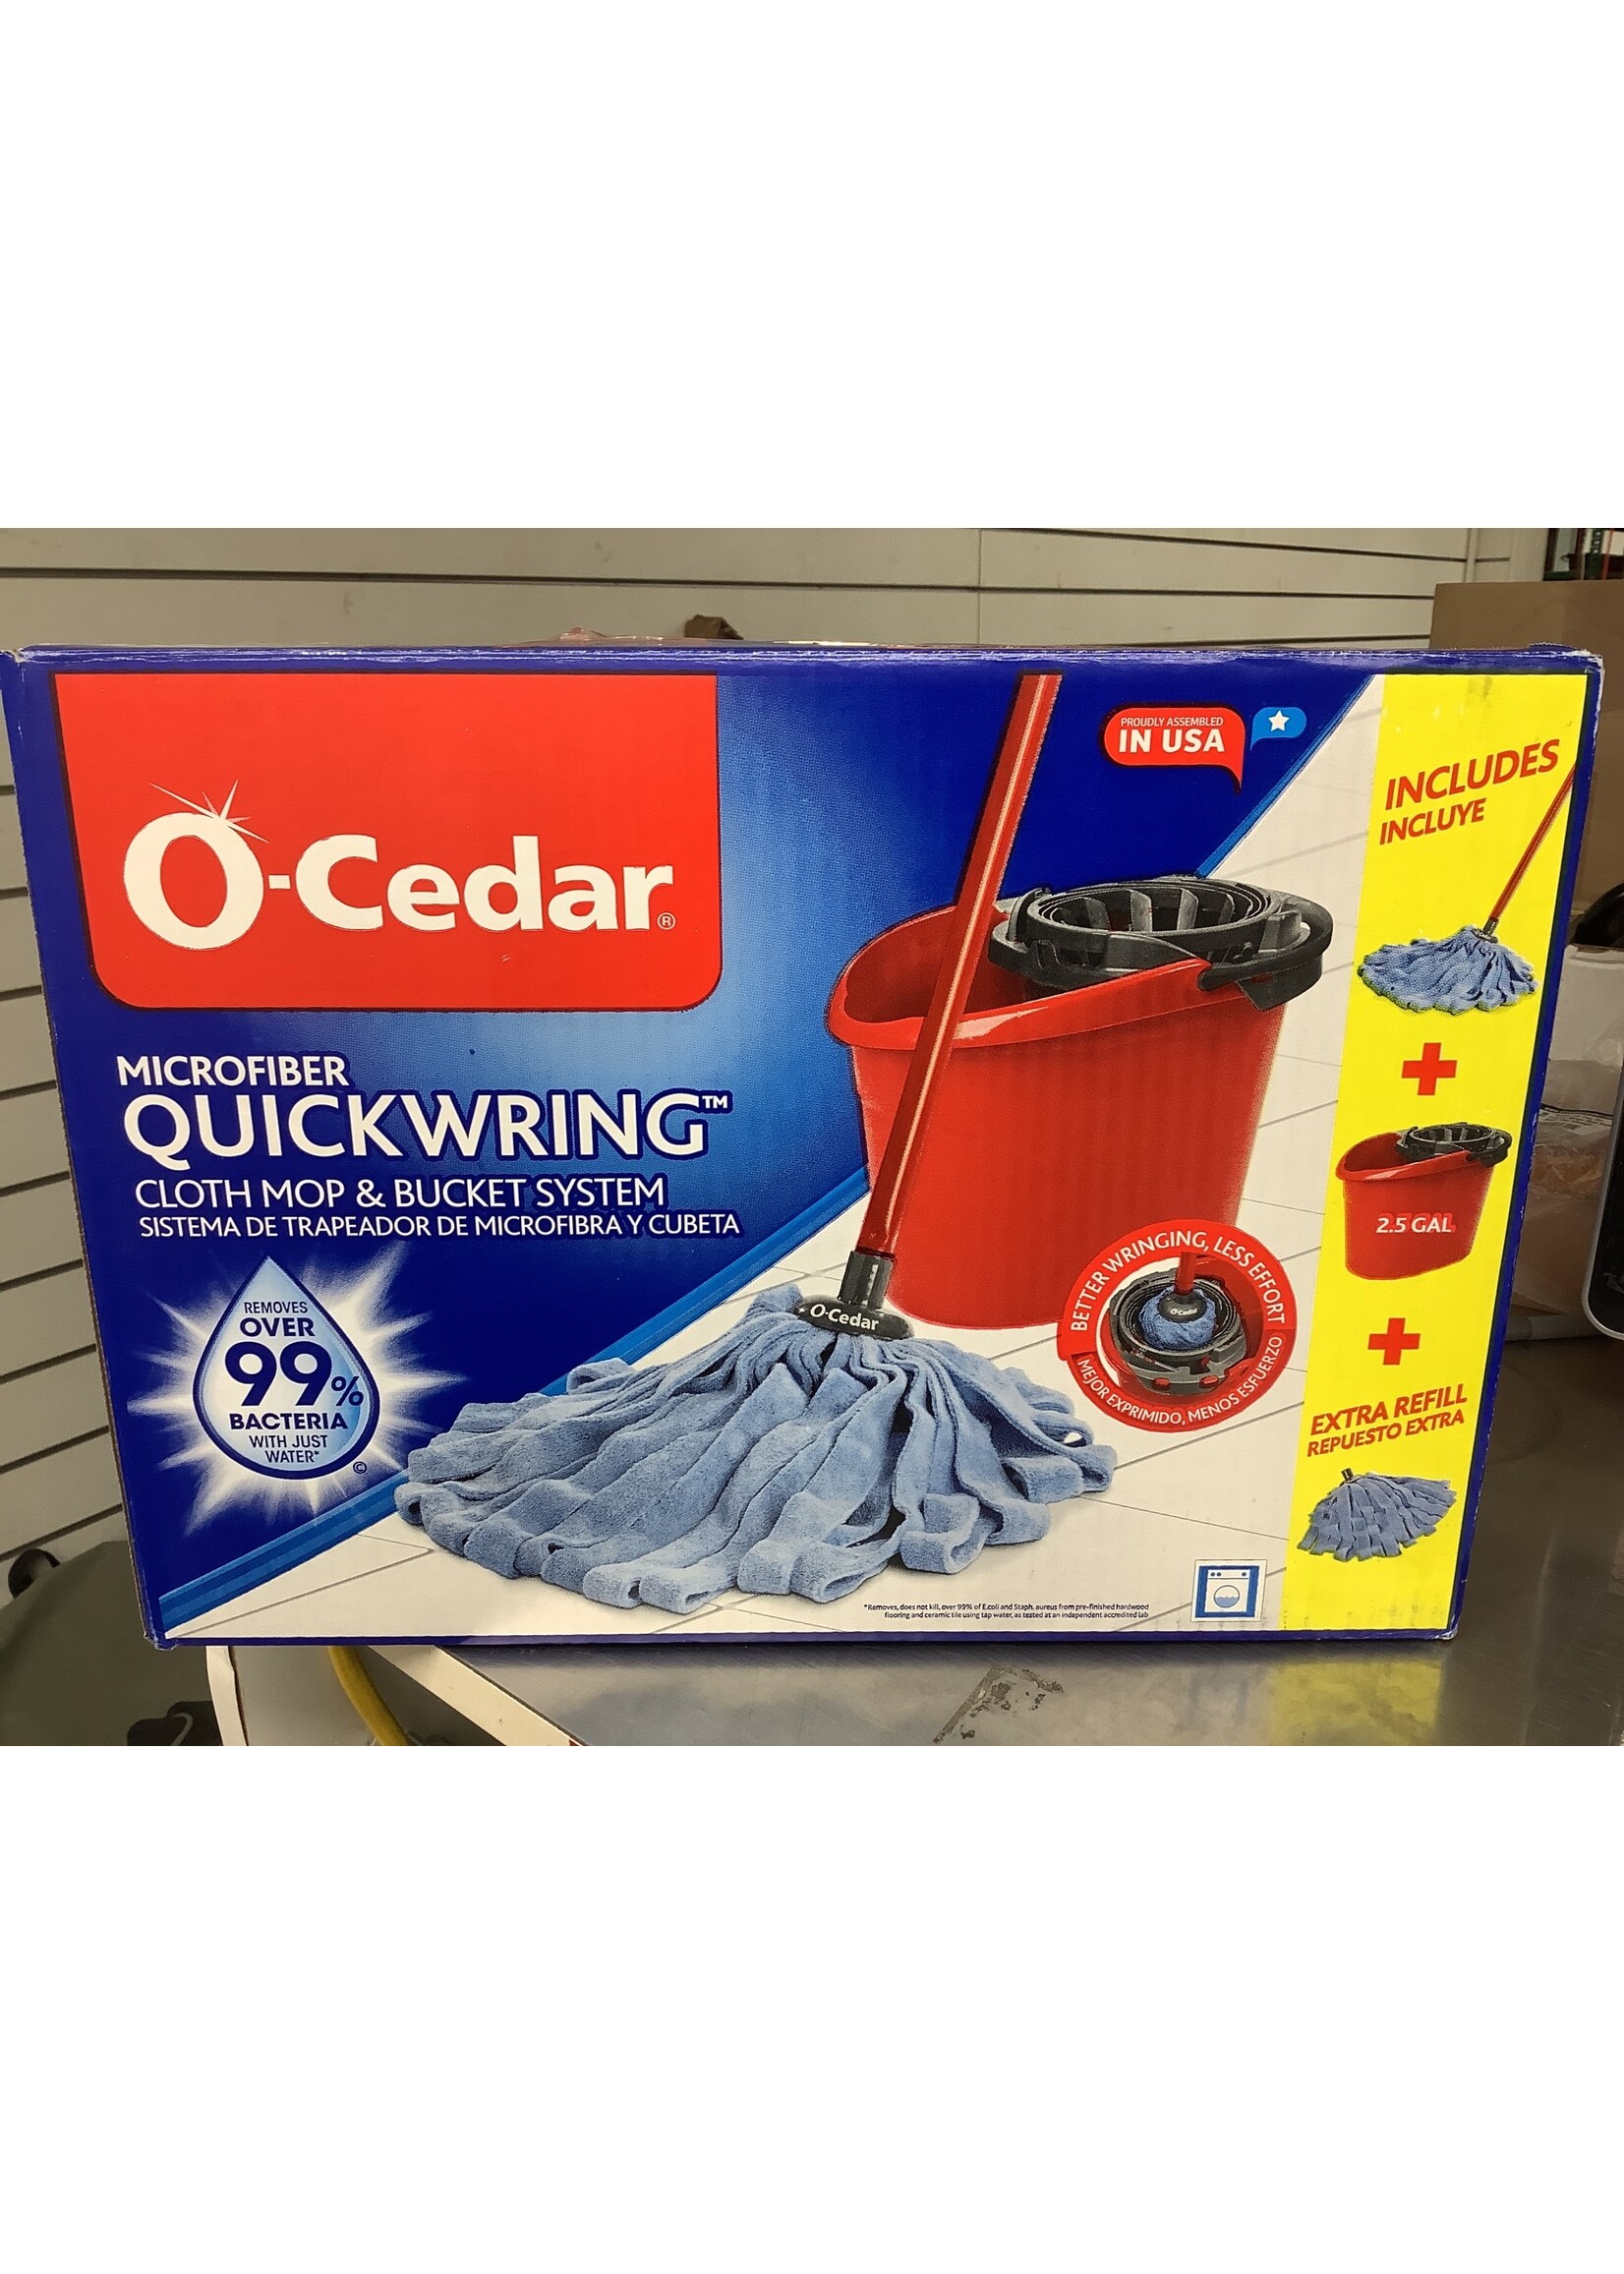 *One Mop Slightly Used O-Cedar Microfiber Cloth Mop & QuickWring Bucket System with 1 Extra Refill